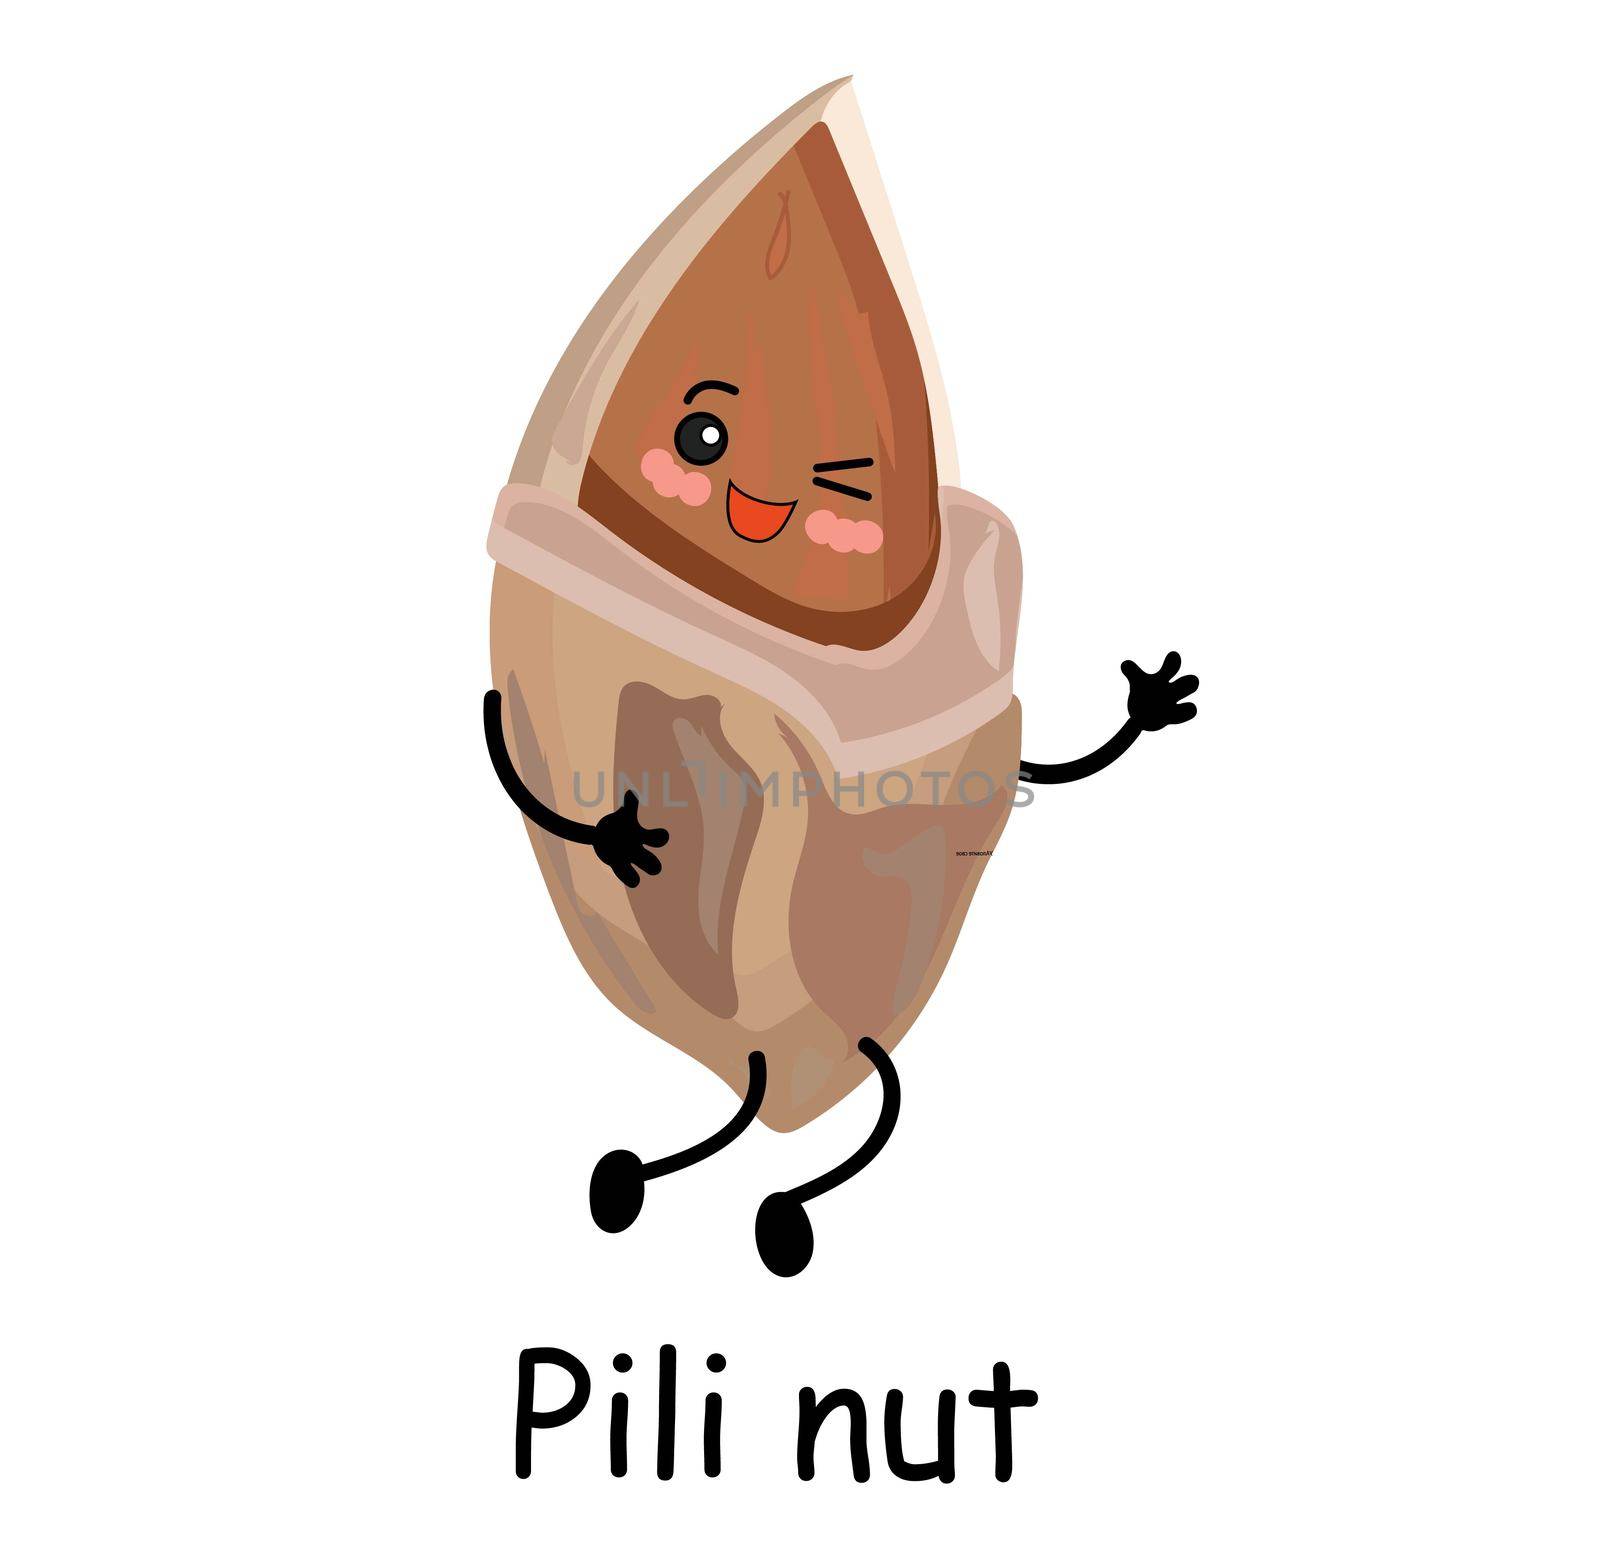 Hawaiian Pili nut. Exotic products. Cute character with arms and legs.